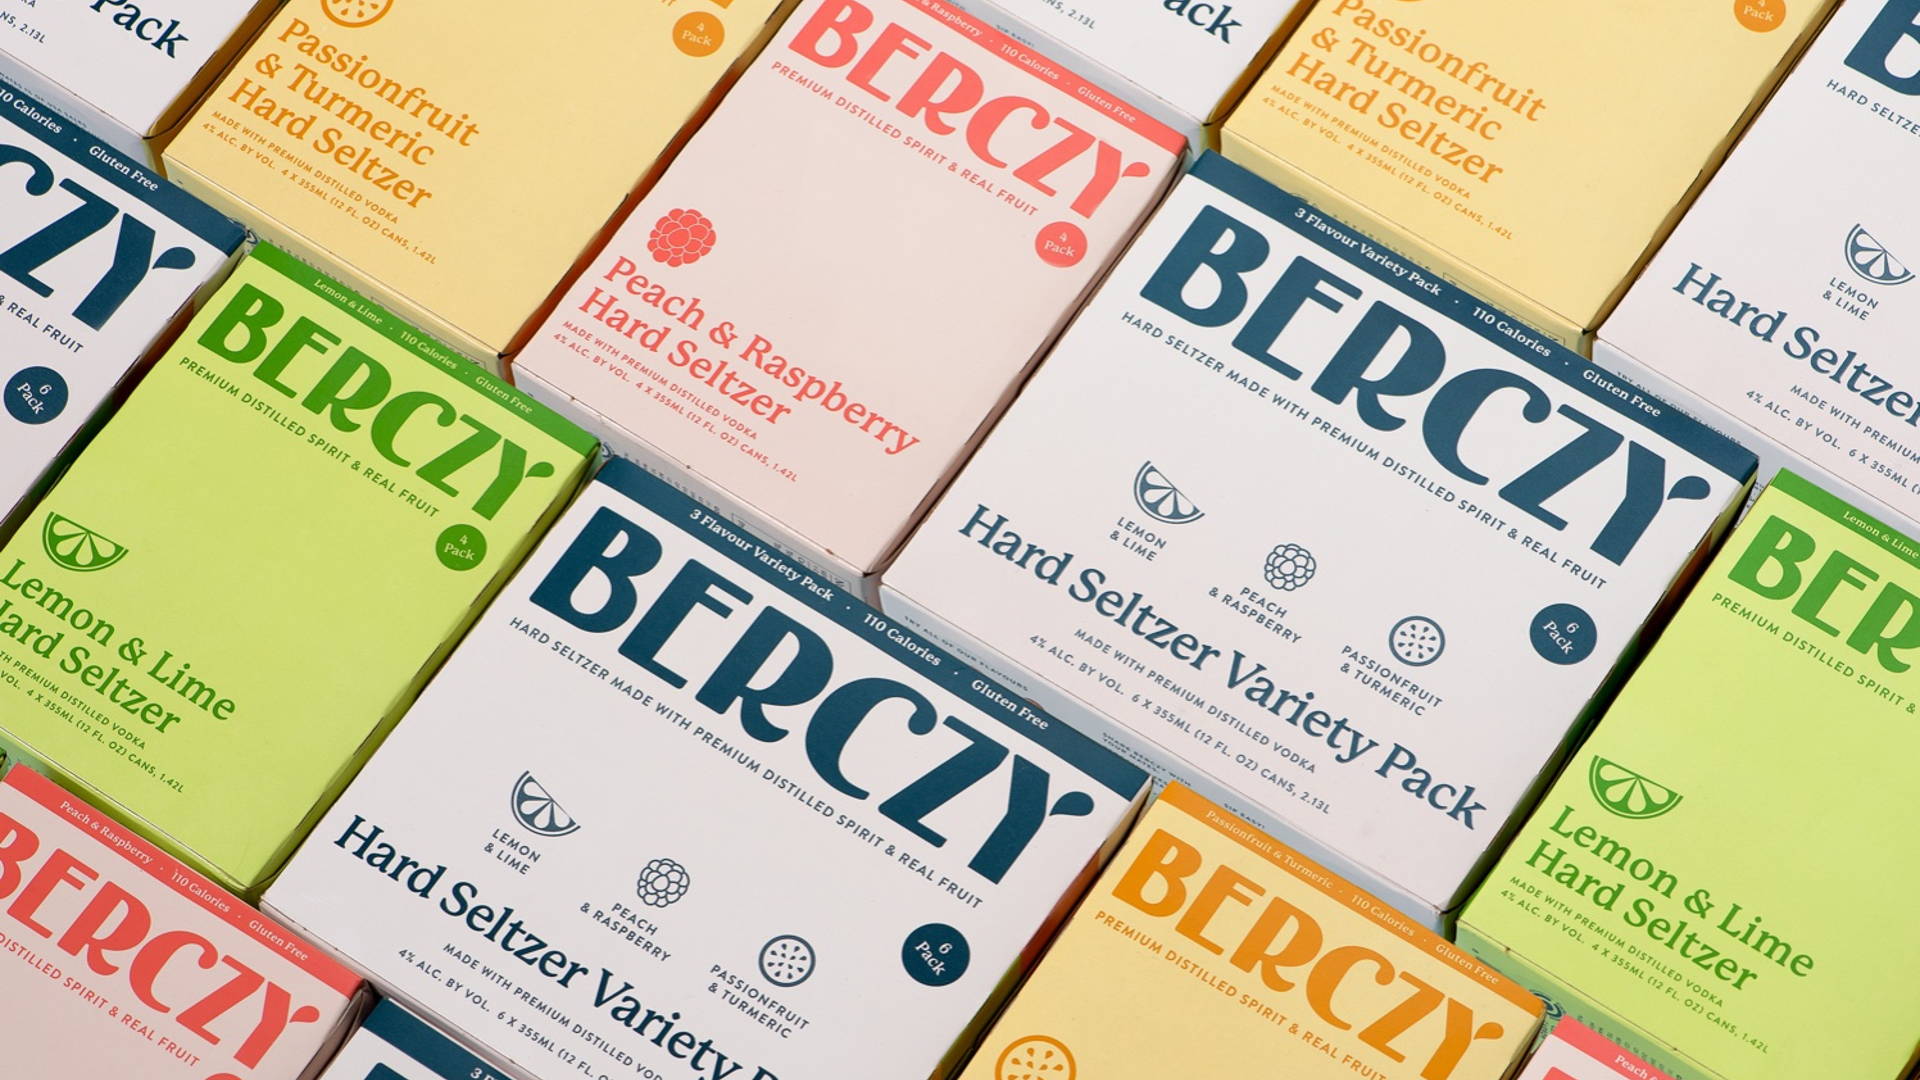 Featured image for Berczy Hard Seltzer Packaging Infuses Cheeky British Humor Into The Design